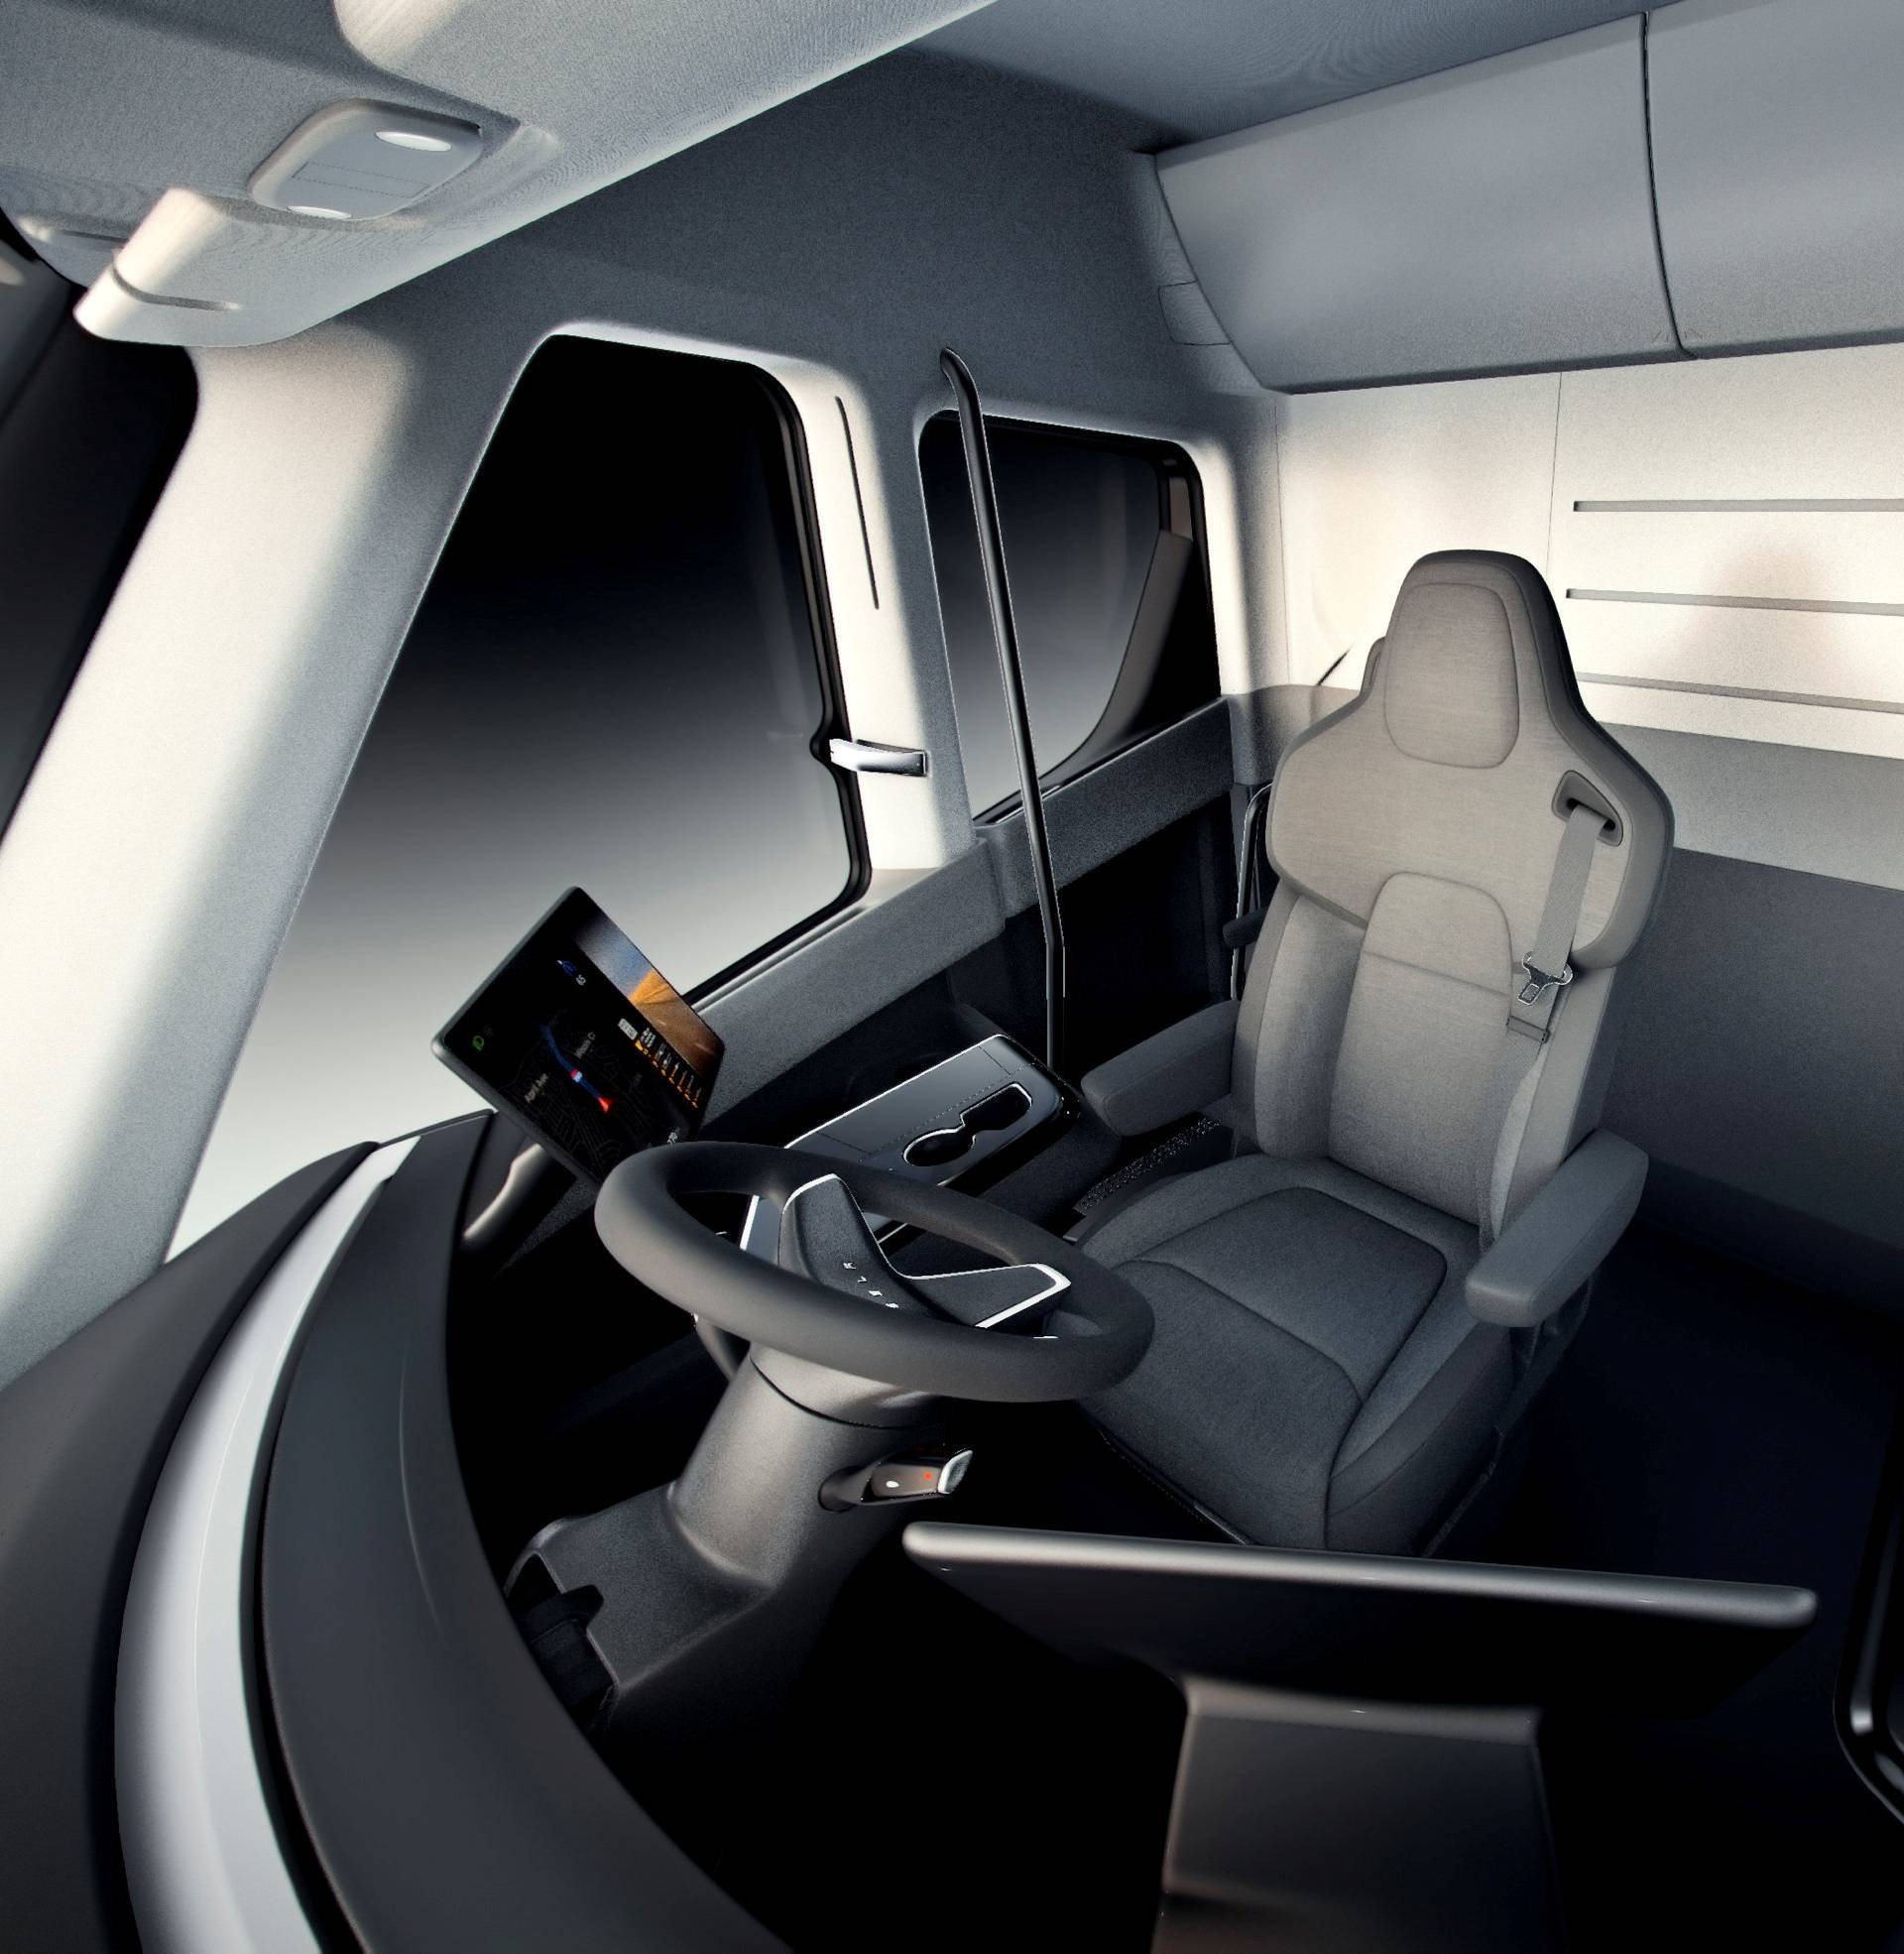 Undated handout image of the interior of the Tesla Semi